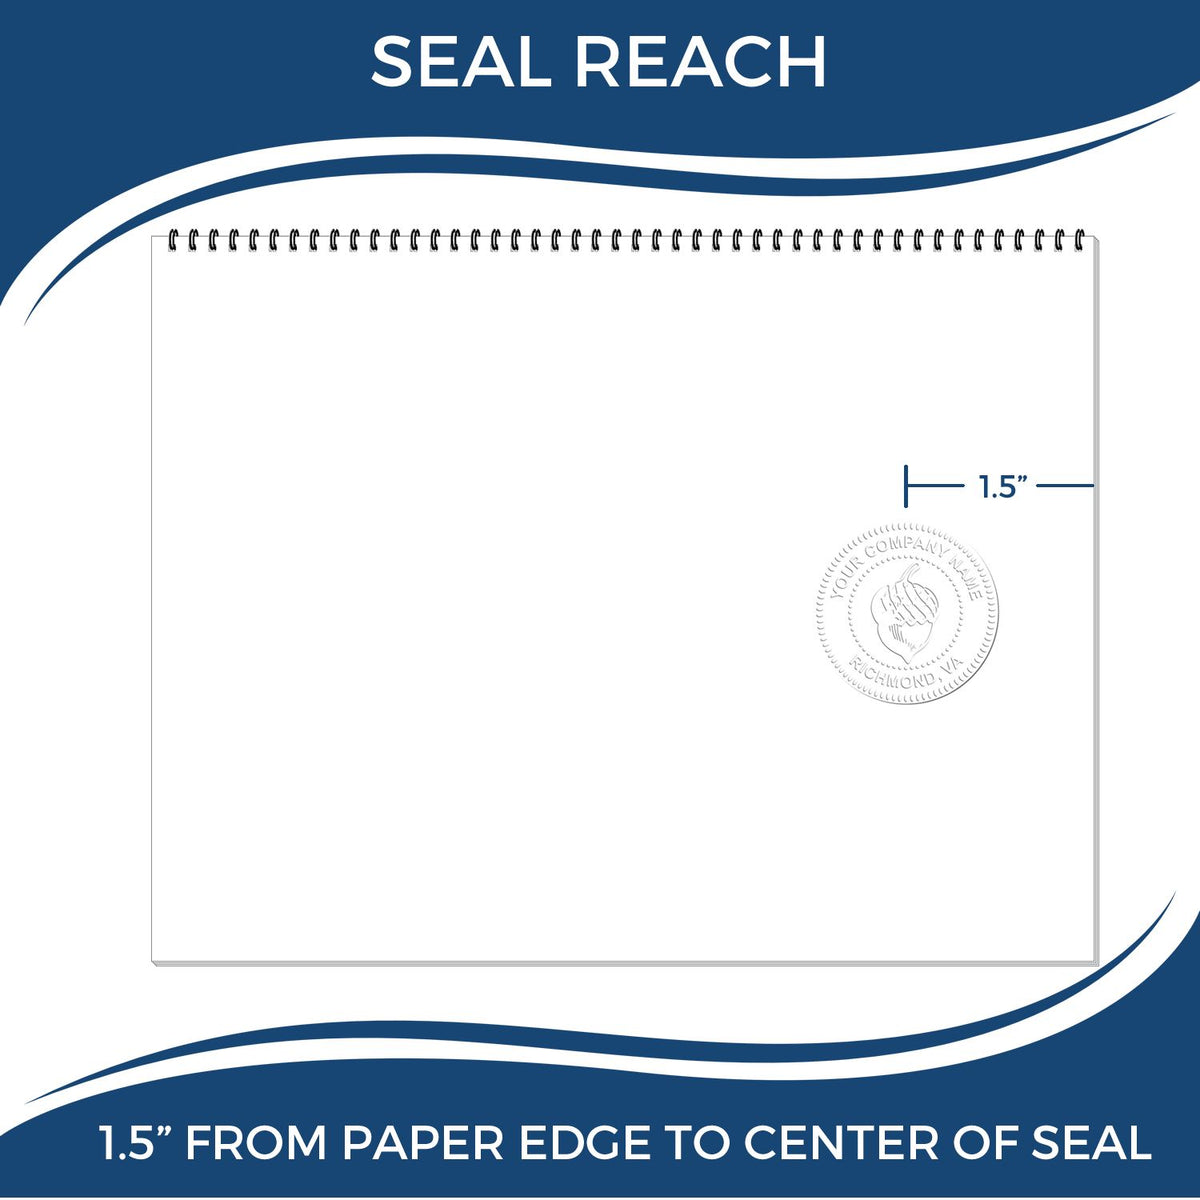 An infographic showing the seal reach which is represented by a ruler and a miniature seal image of the Handheld New Jersey Architect Seal Embosser